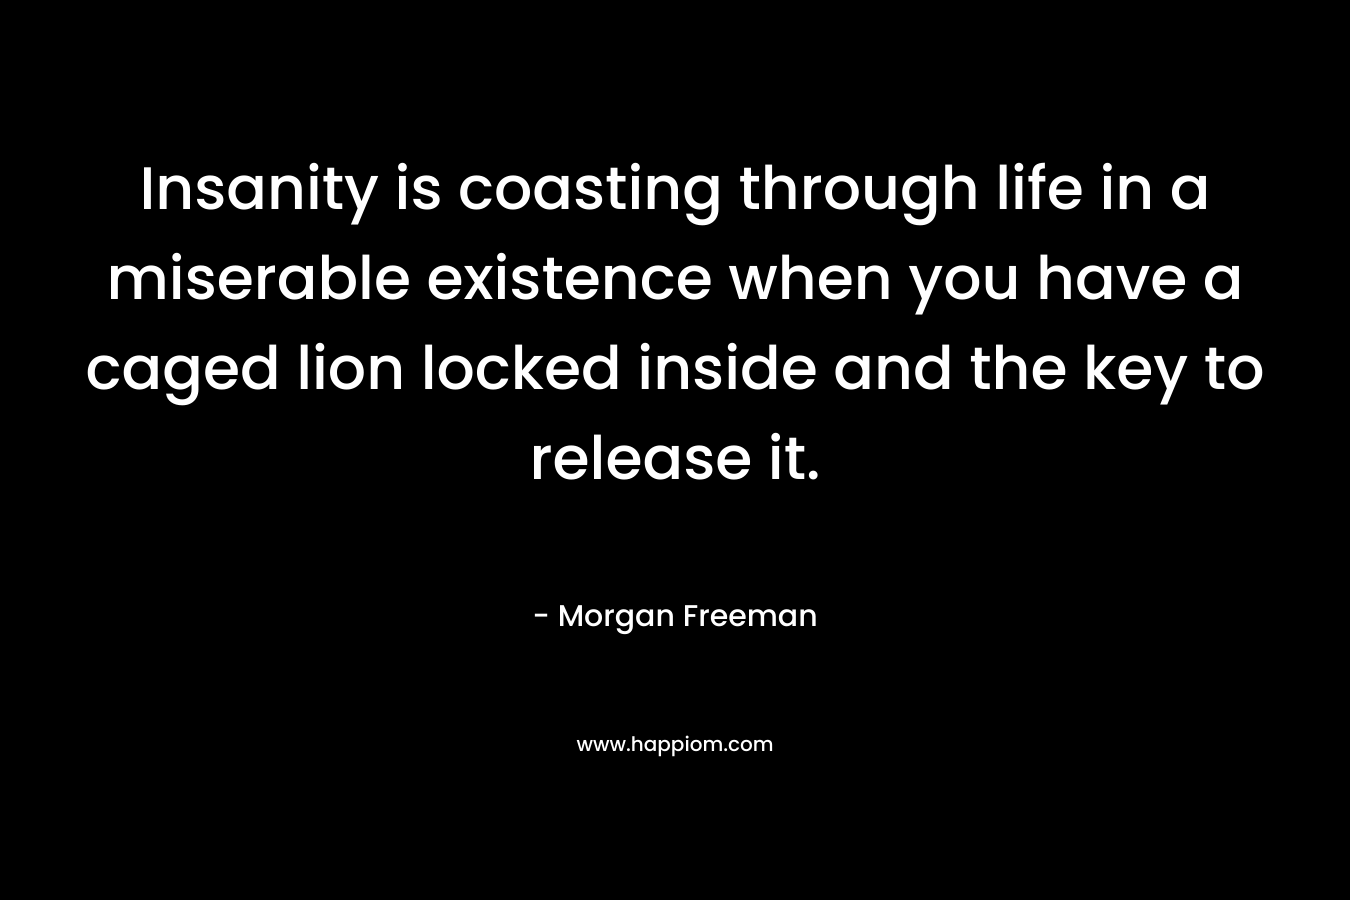 Insanity is coasting through life in a miserable existence when you have a caged lion locked inside and the key to release it.